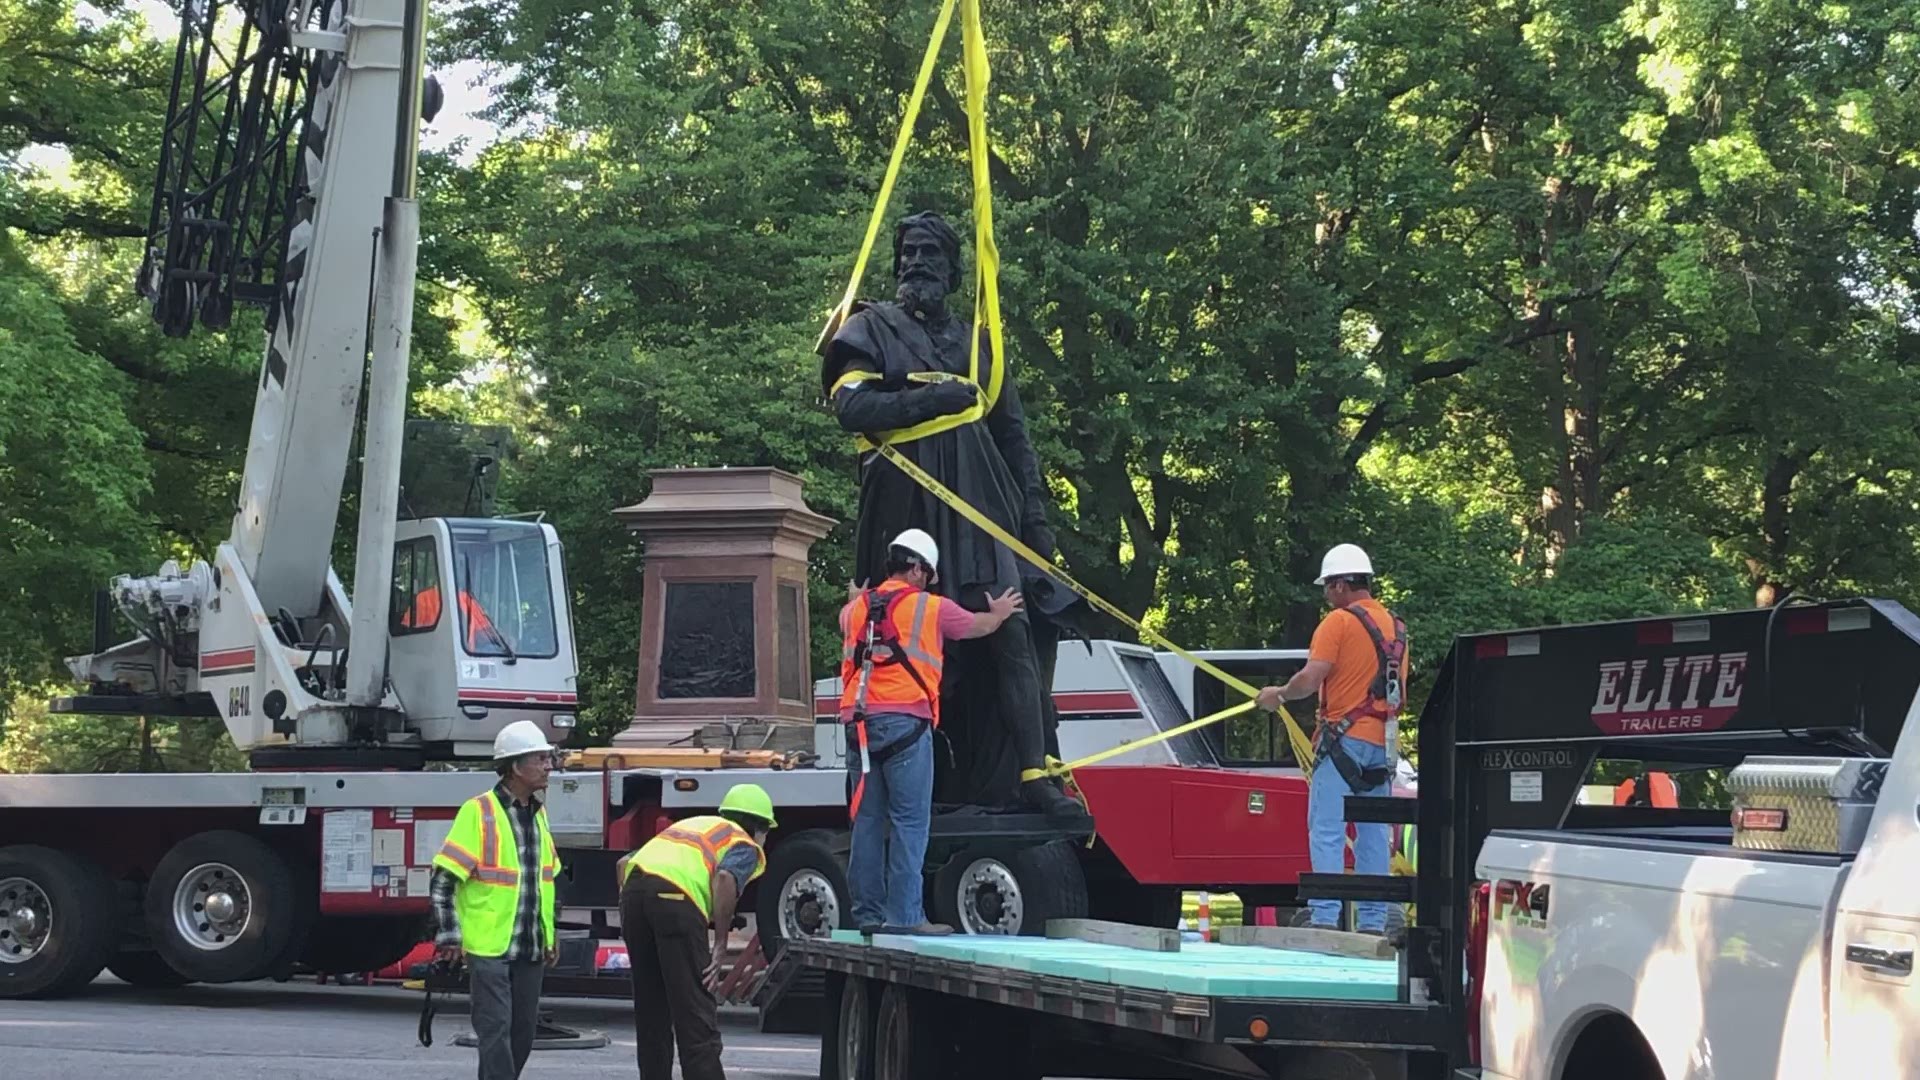 The statue was removed Tuesday morning